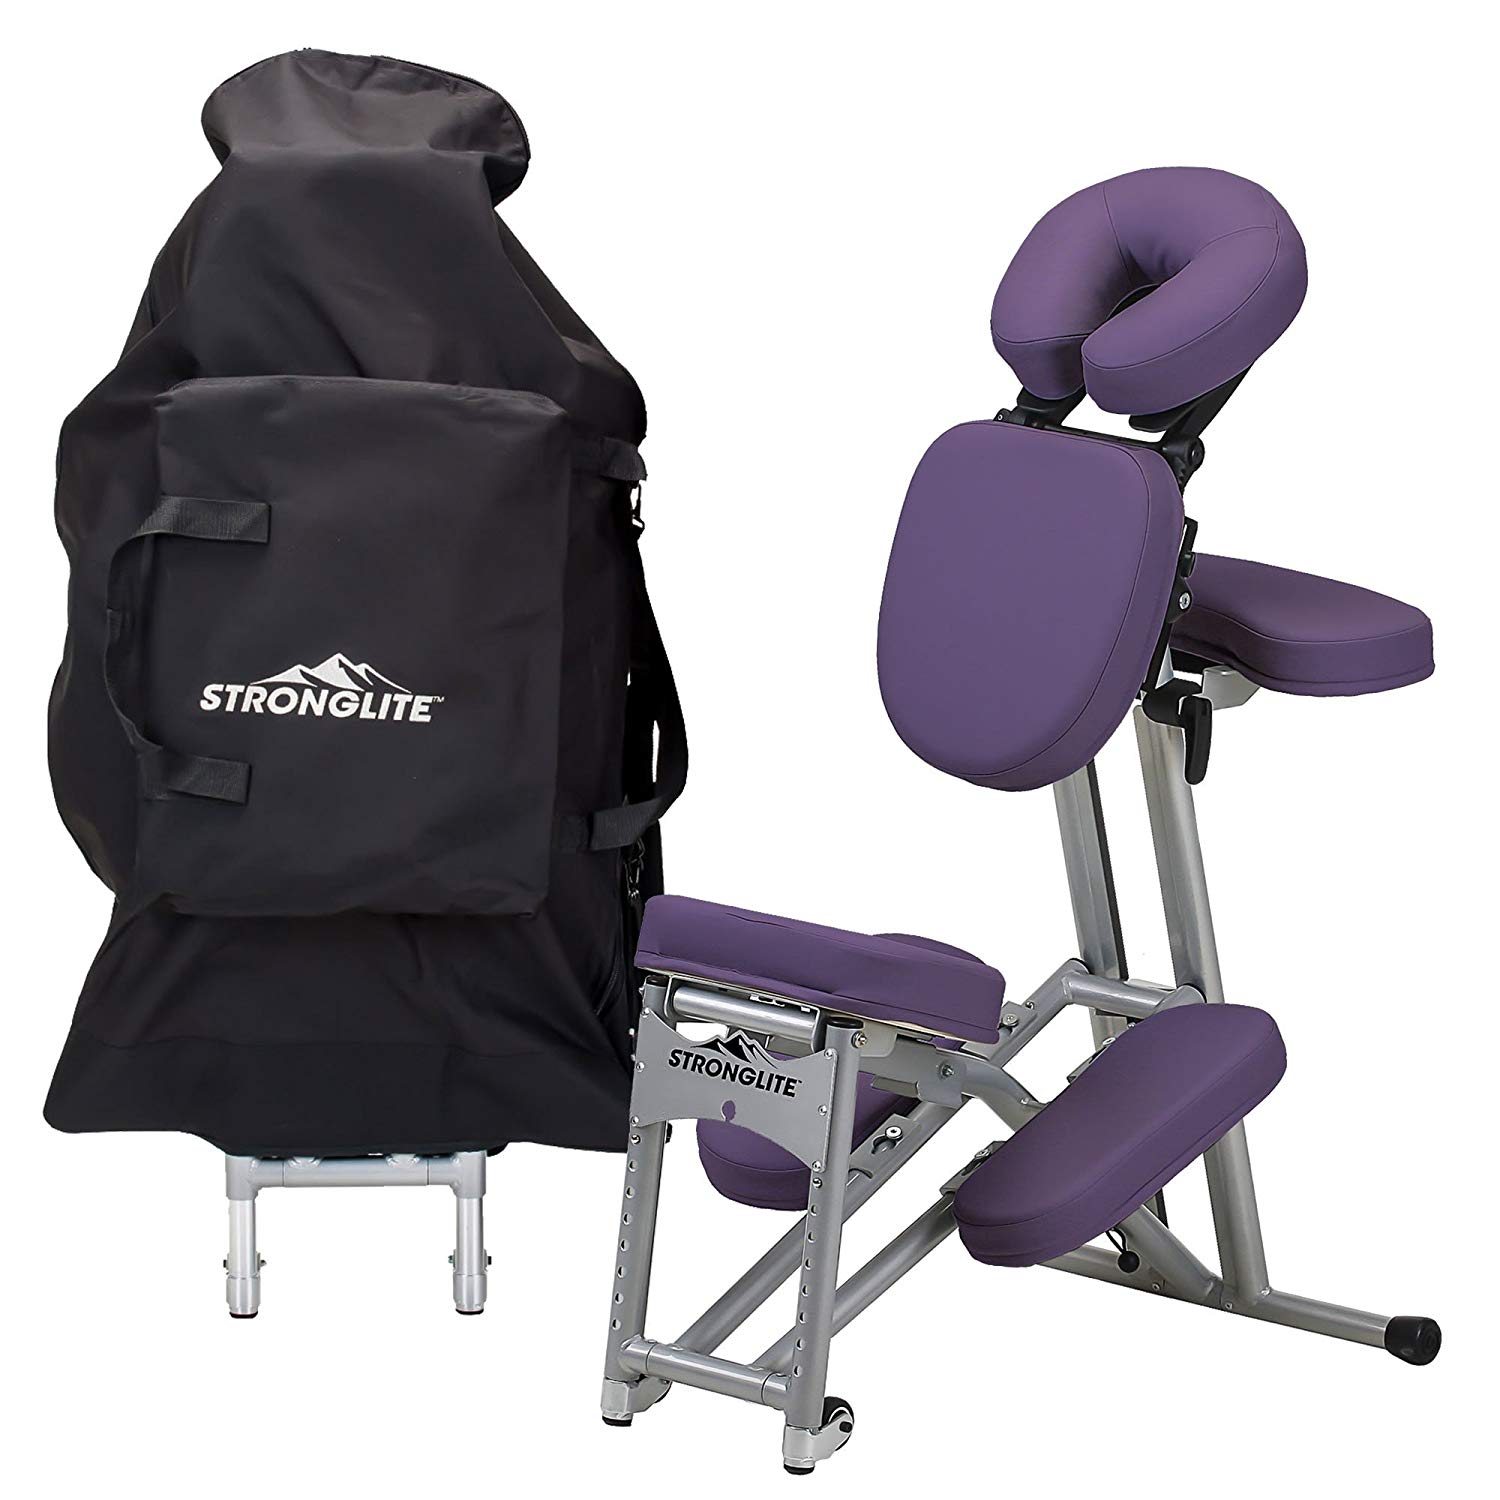 STRONGLITE Portable Massage Chair